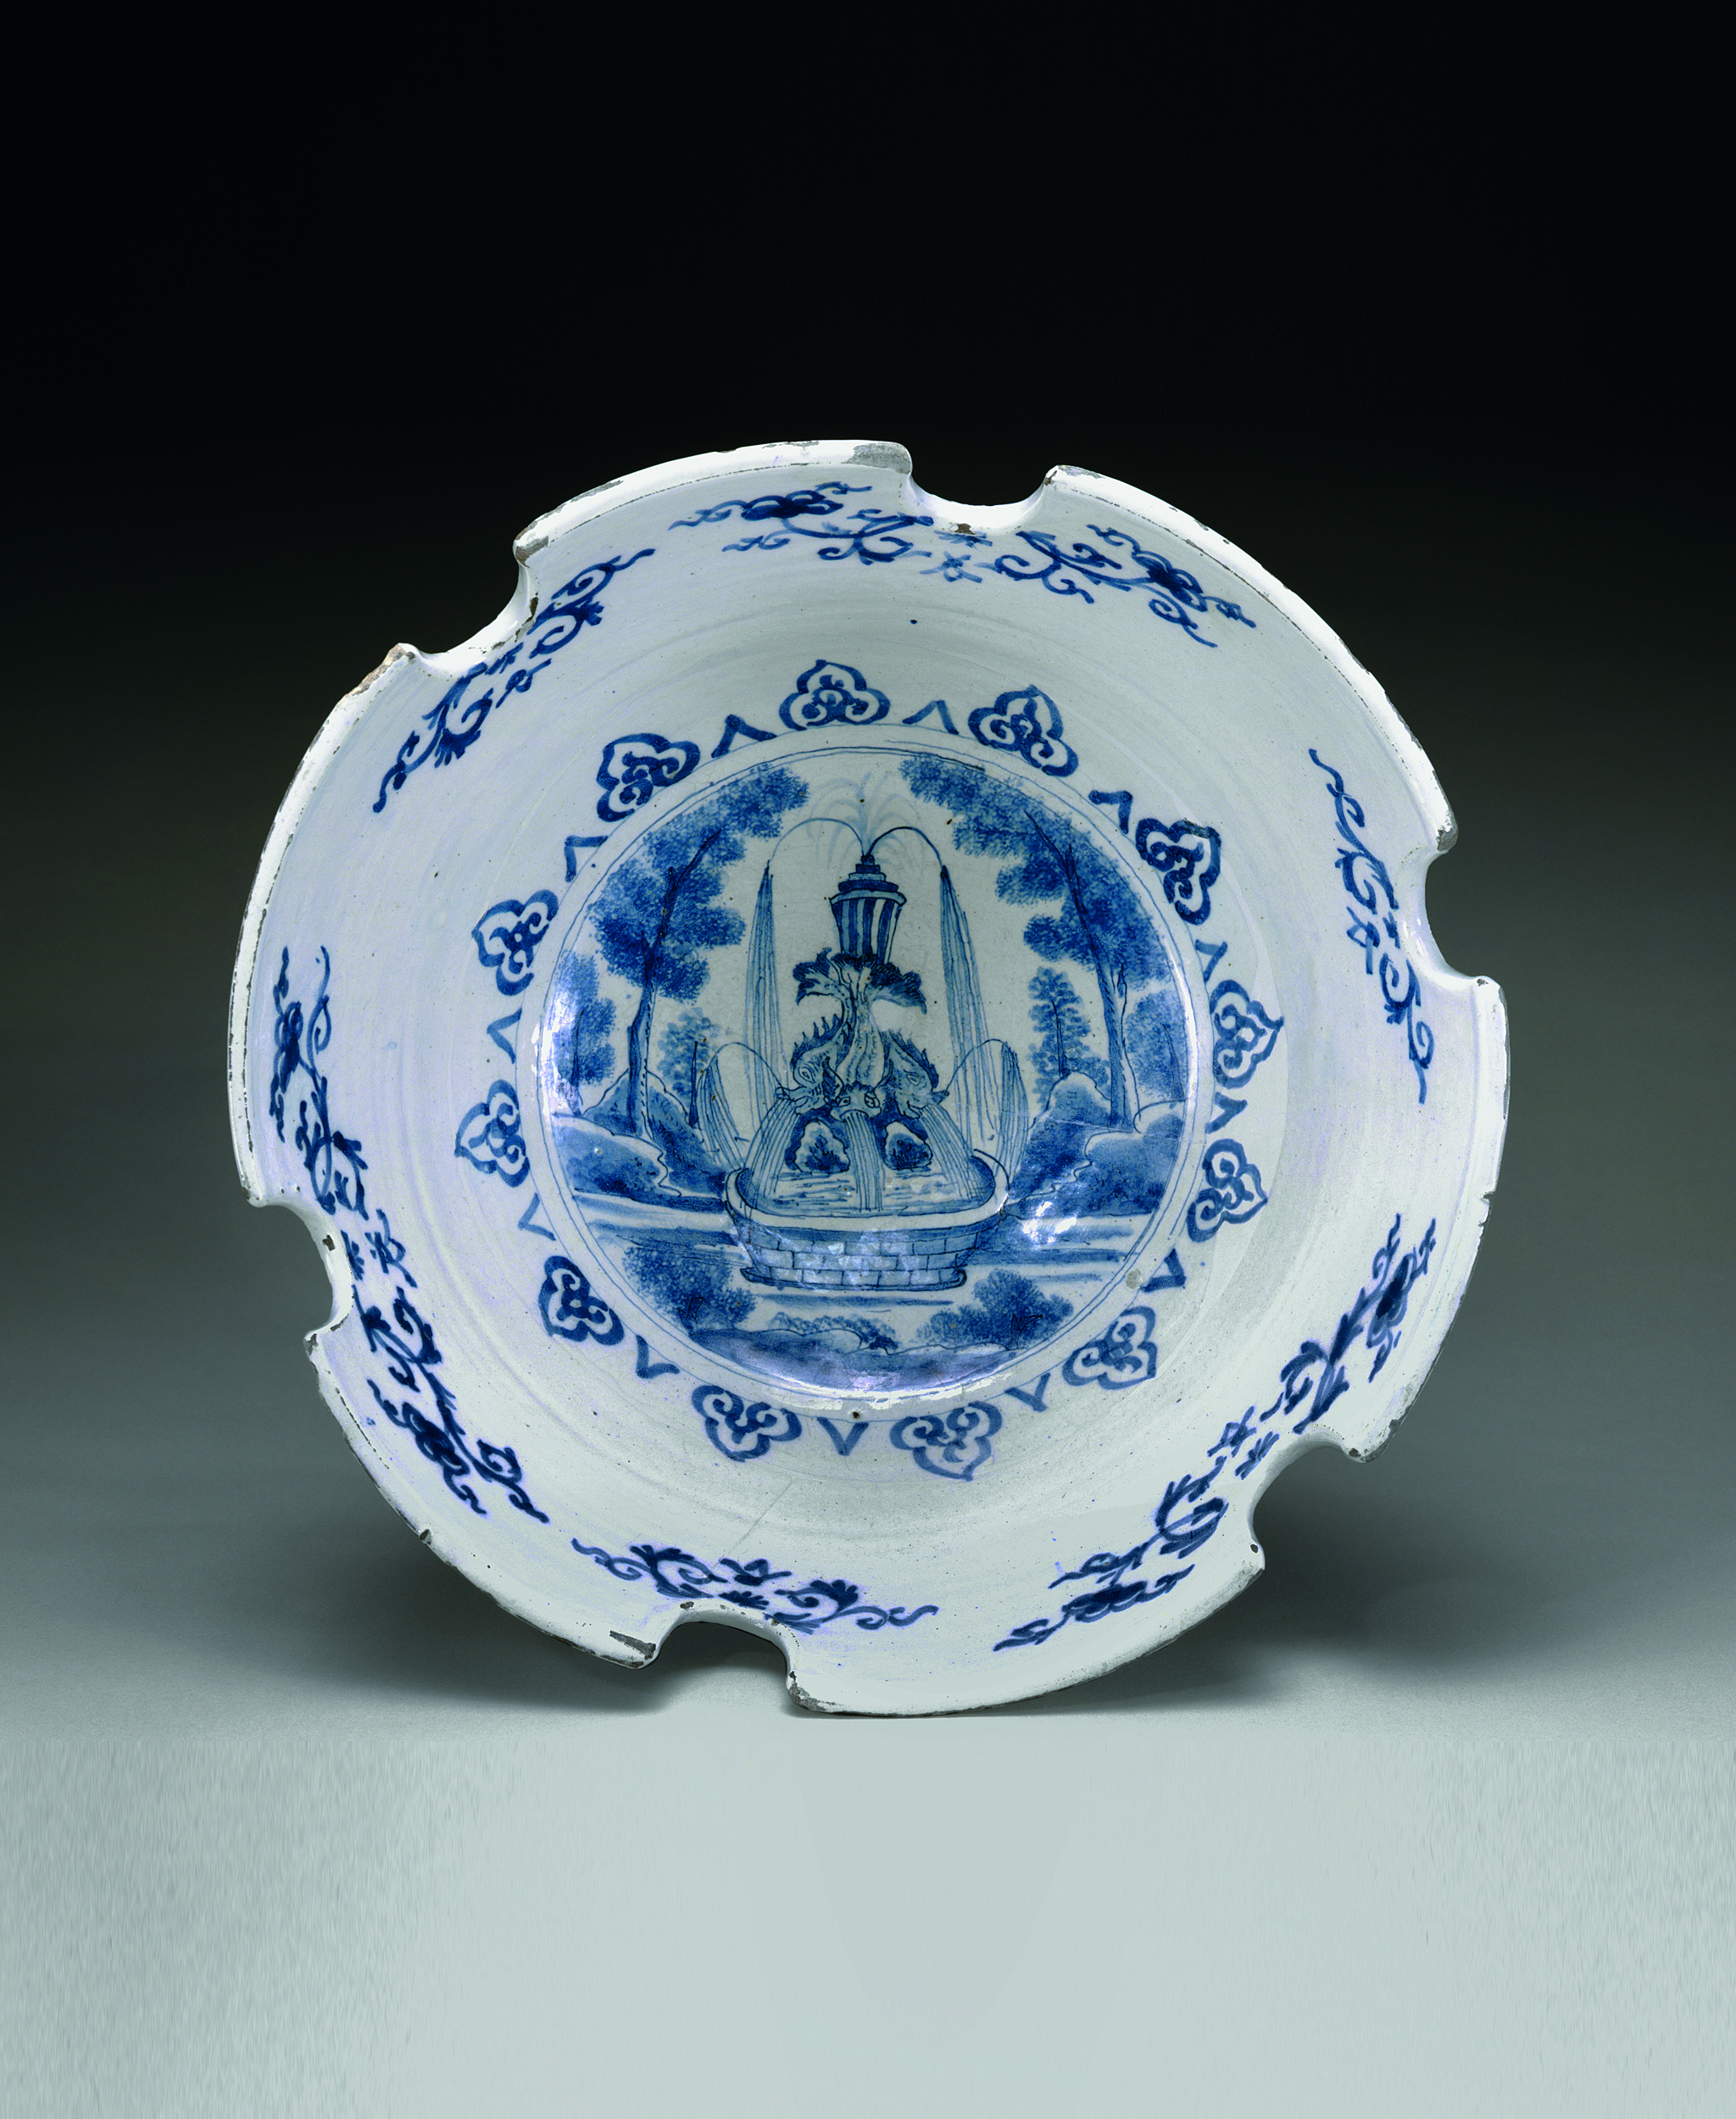 Monteith, probably Delft, tin-glazed earthenware, painted with indecipherable marks in cobalt blue on base, ca. 1695. 6 3⁄4 x 131⁄4 in. (17.15 x 33.66 cm), 67.103, Historic Deerfield, Deerfield, Massachusetts. Photography by Penny Leveritt